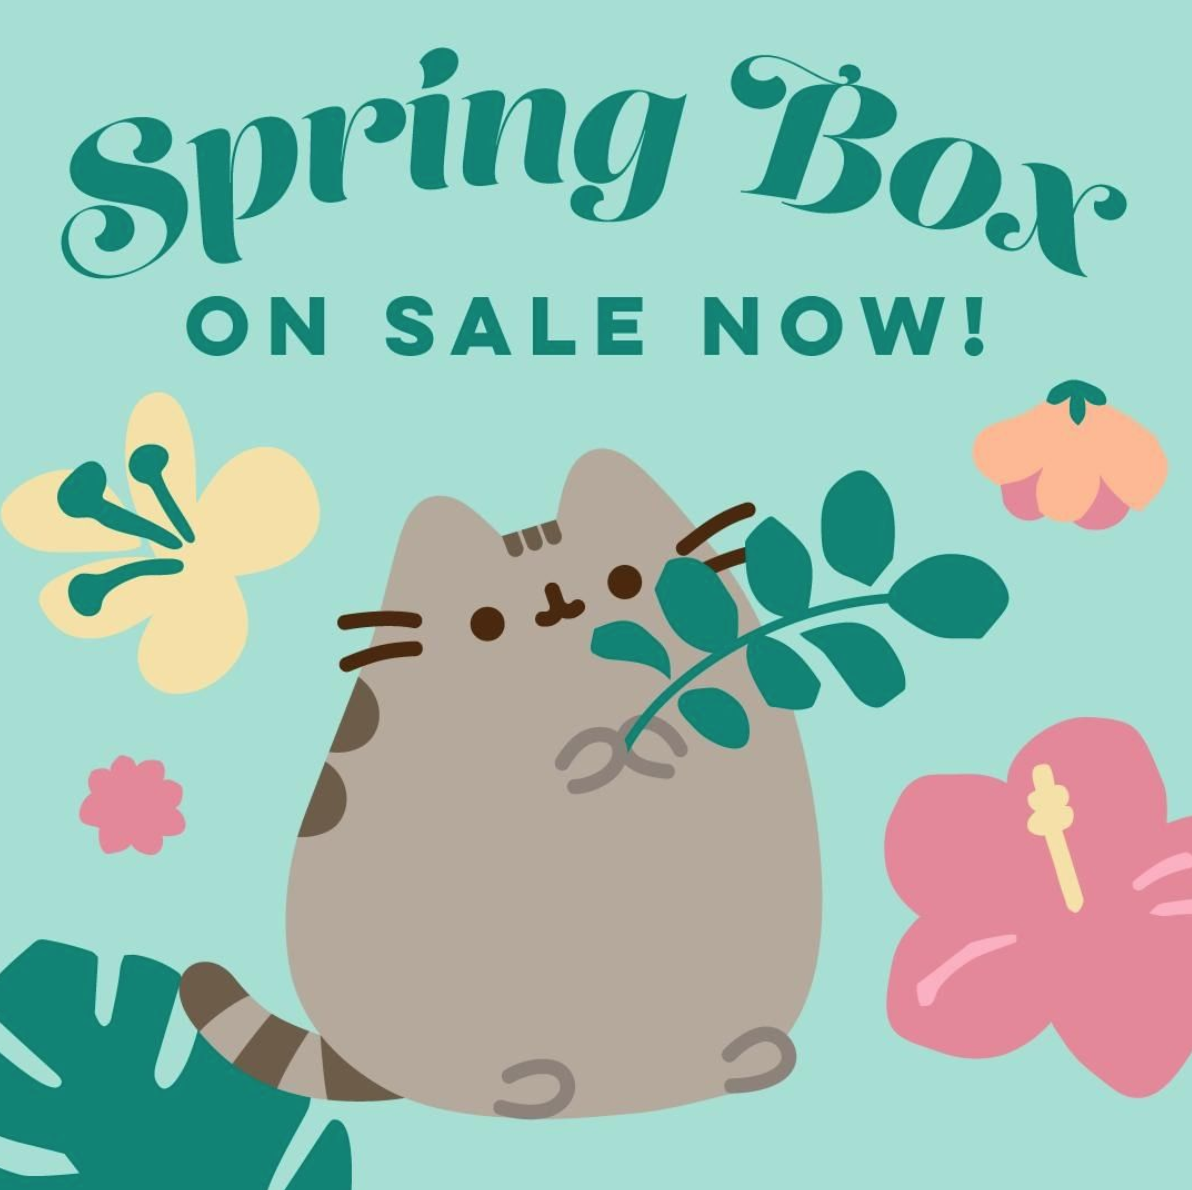 Pusheen Box Subscriptions Are Open! Spring 2020 Box Time!